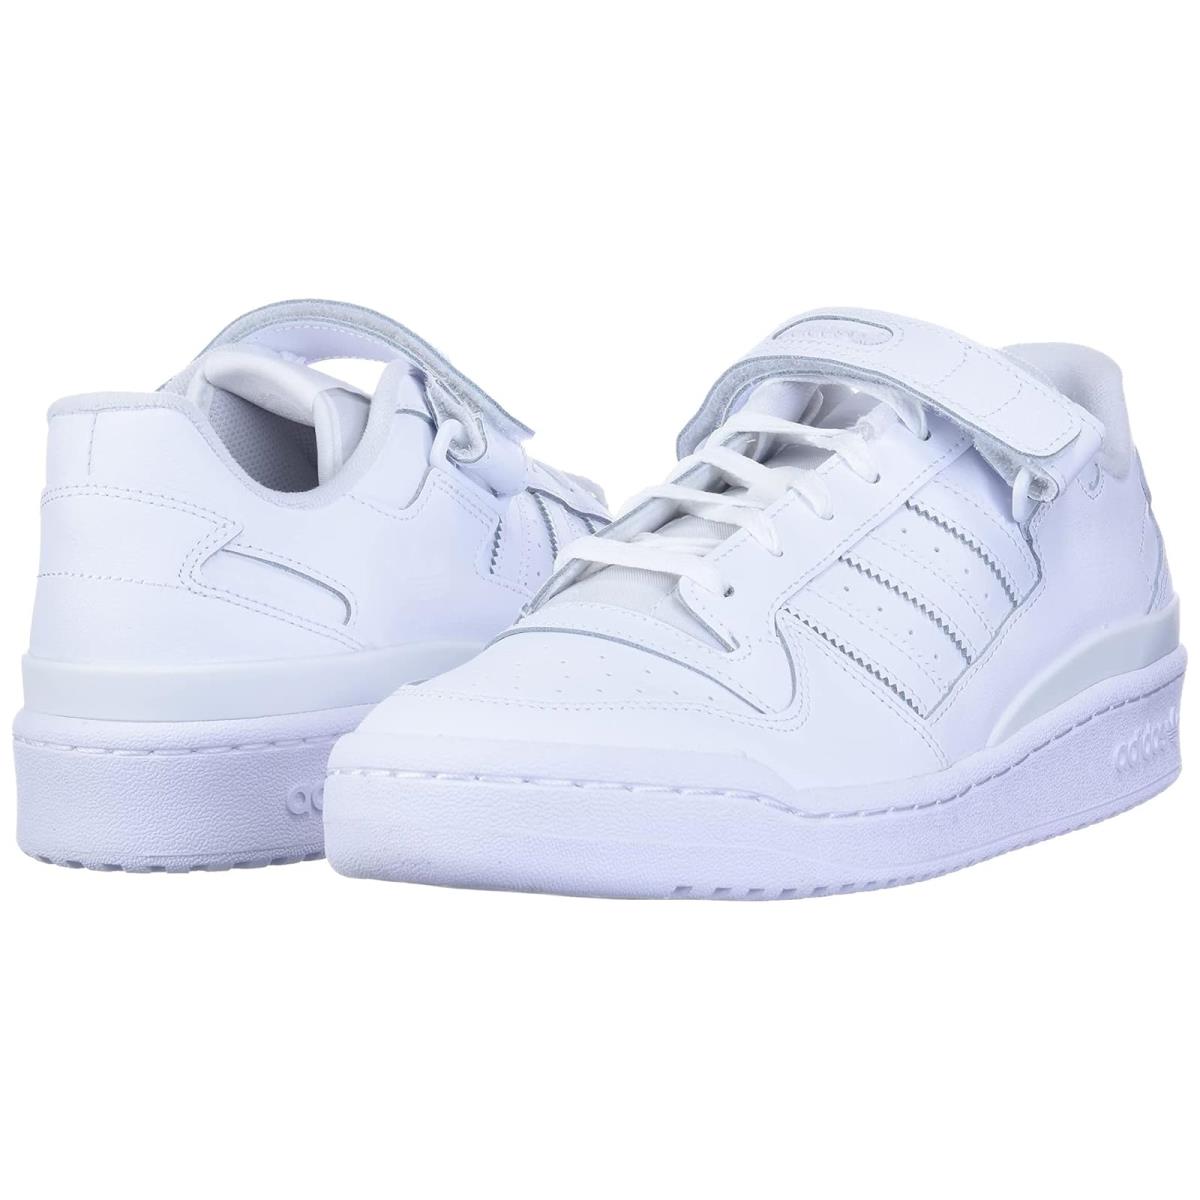 Man`s Sneakers Athletic Shoes Adidas Originals Forum Low Footwear White/Footwear White/Footwear White